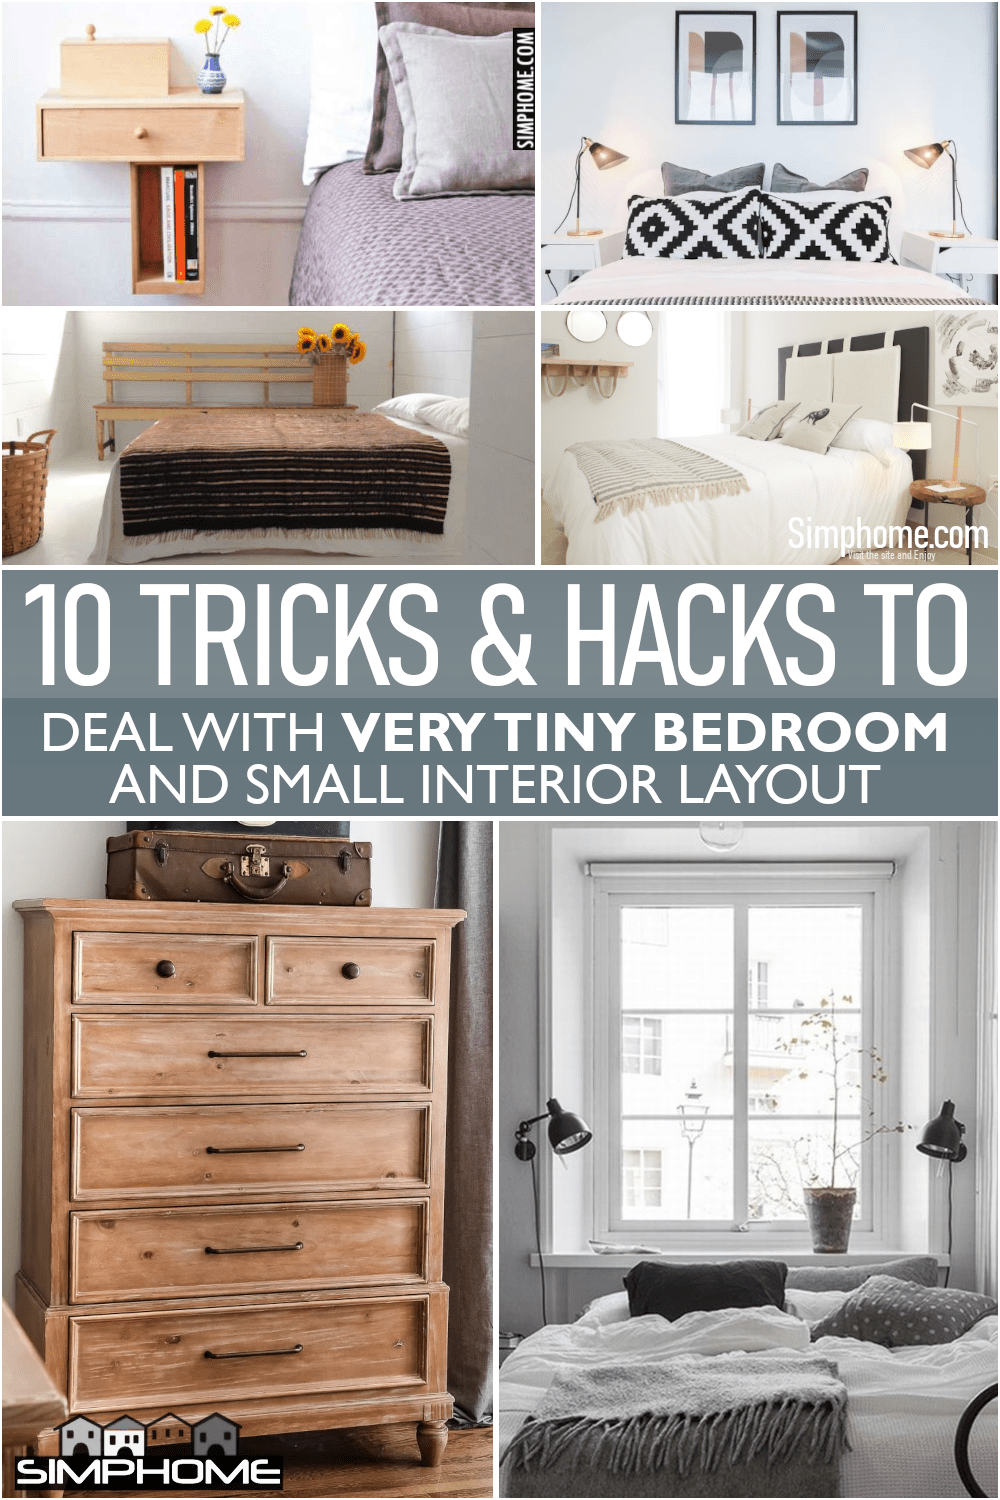 10 Tricks to Deal with a Very Tiny Bedroom via Simphome.comFeatured